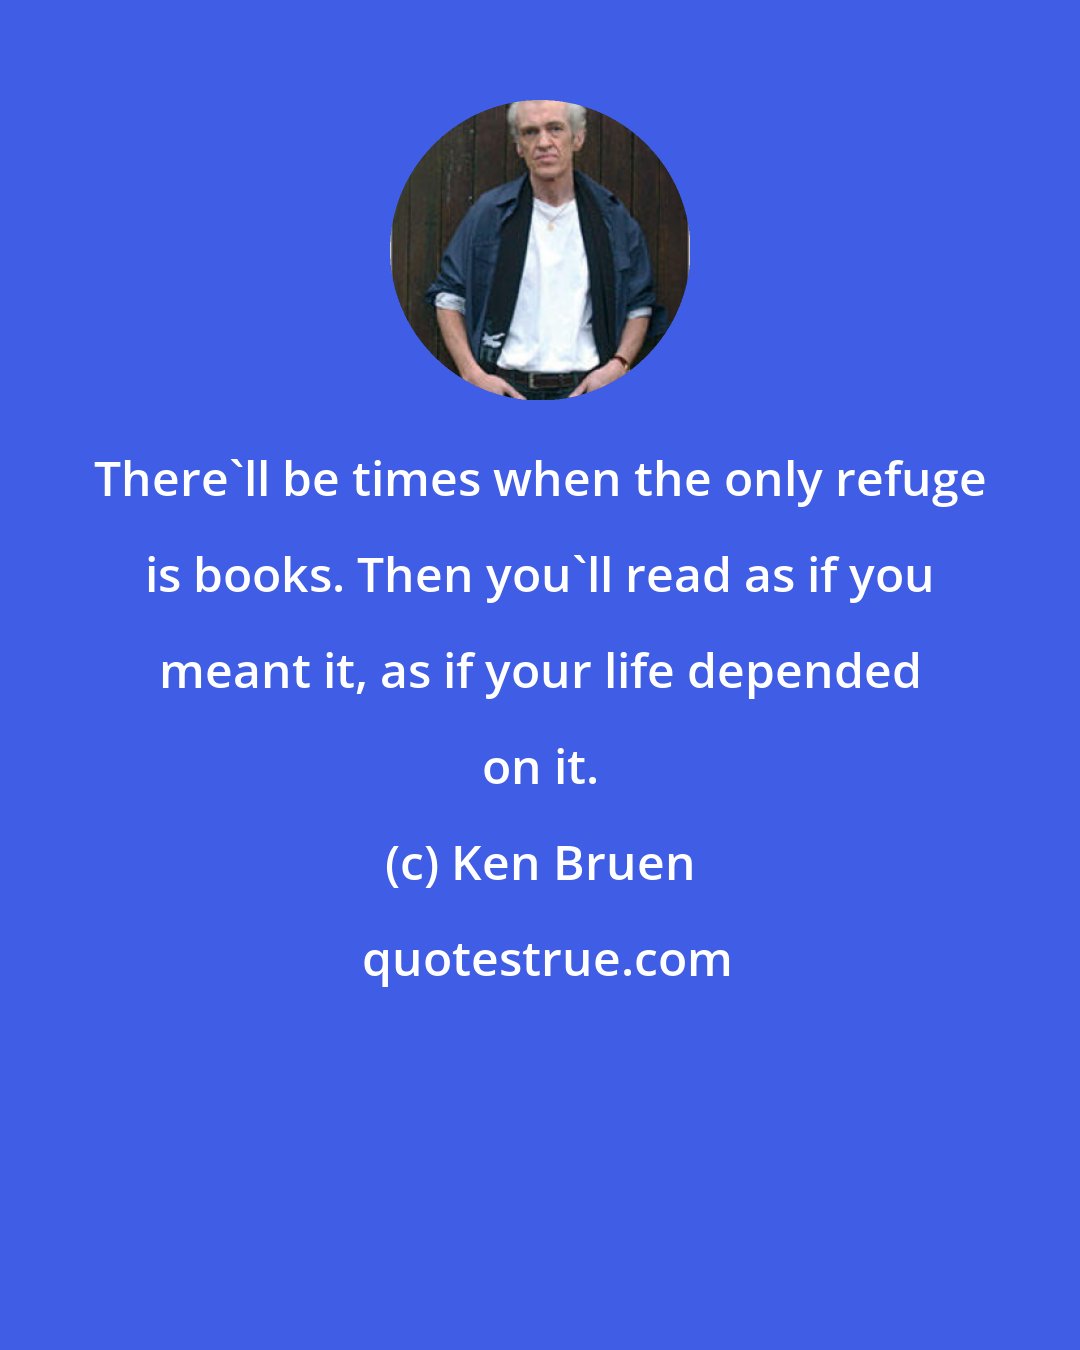 Ken Bruen: There'll be times when the only refuge is books. Then you'll read as if you meant it, as if your life depended on it.